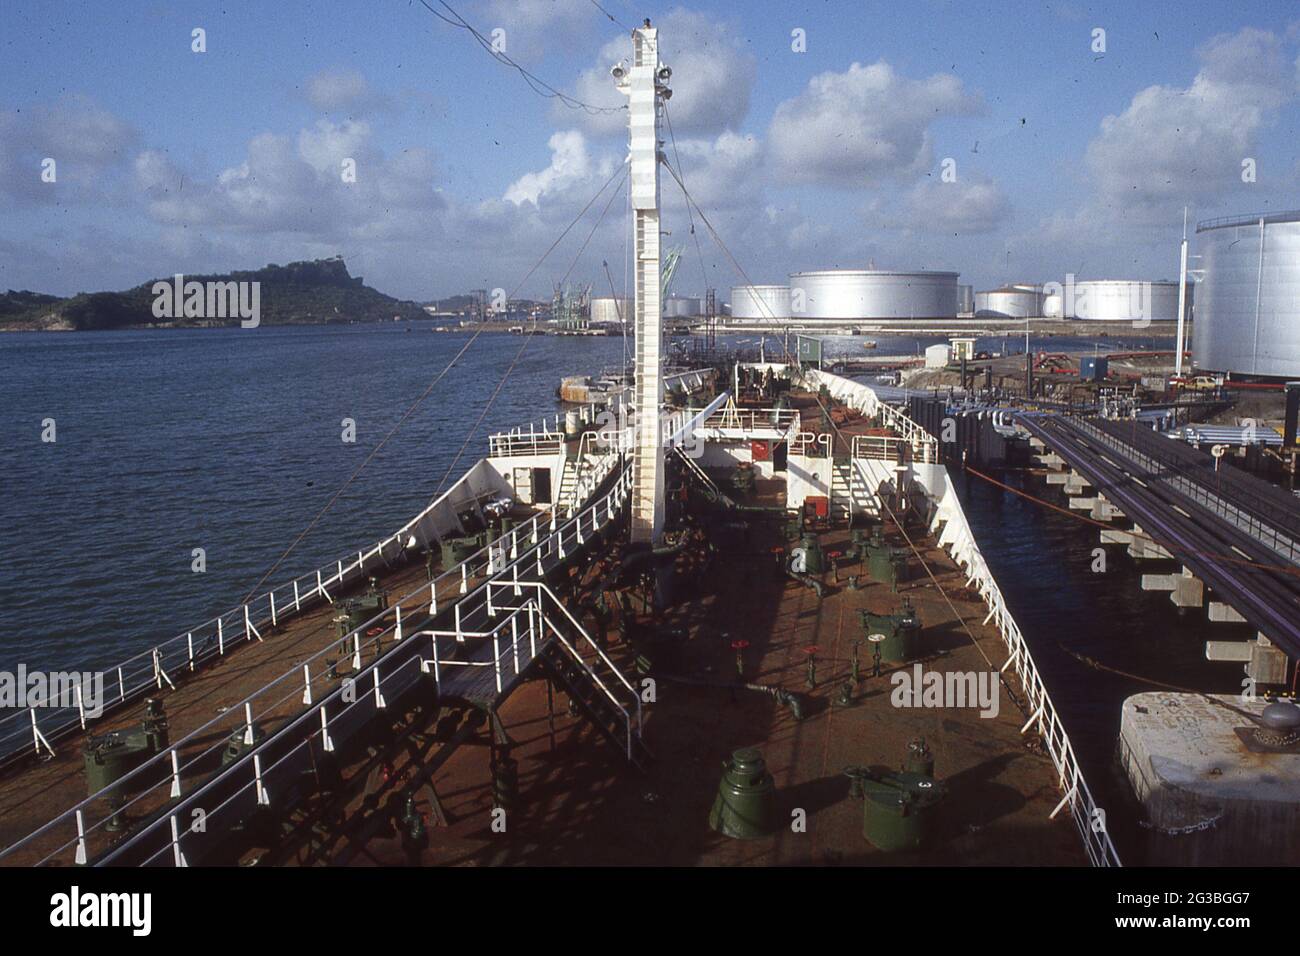 View from the Bridge over the deck of an Oil Tanker Operating in the Carribean Stock Photo